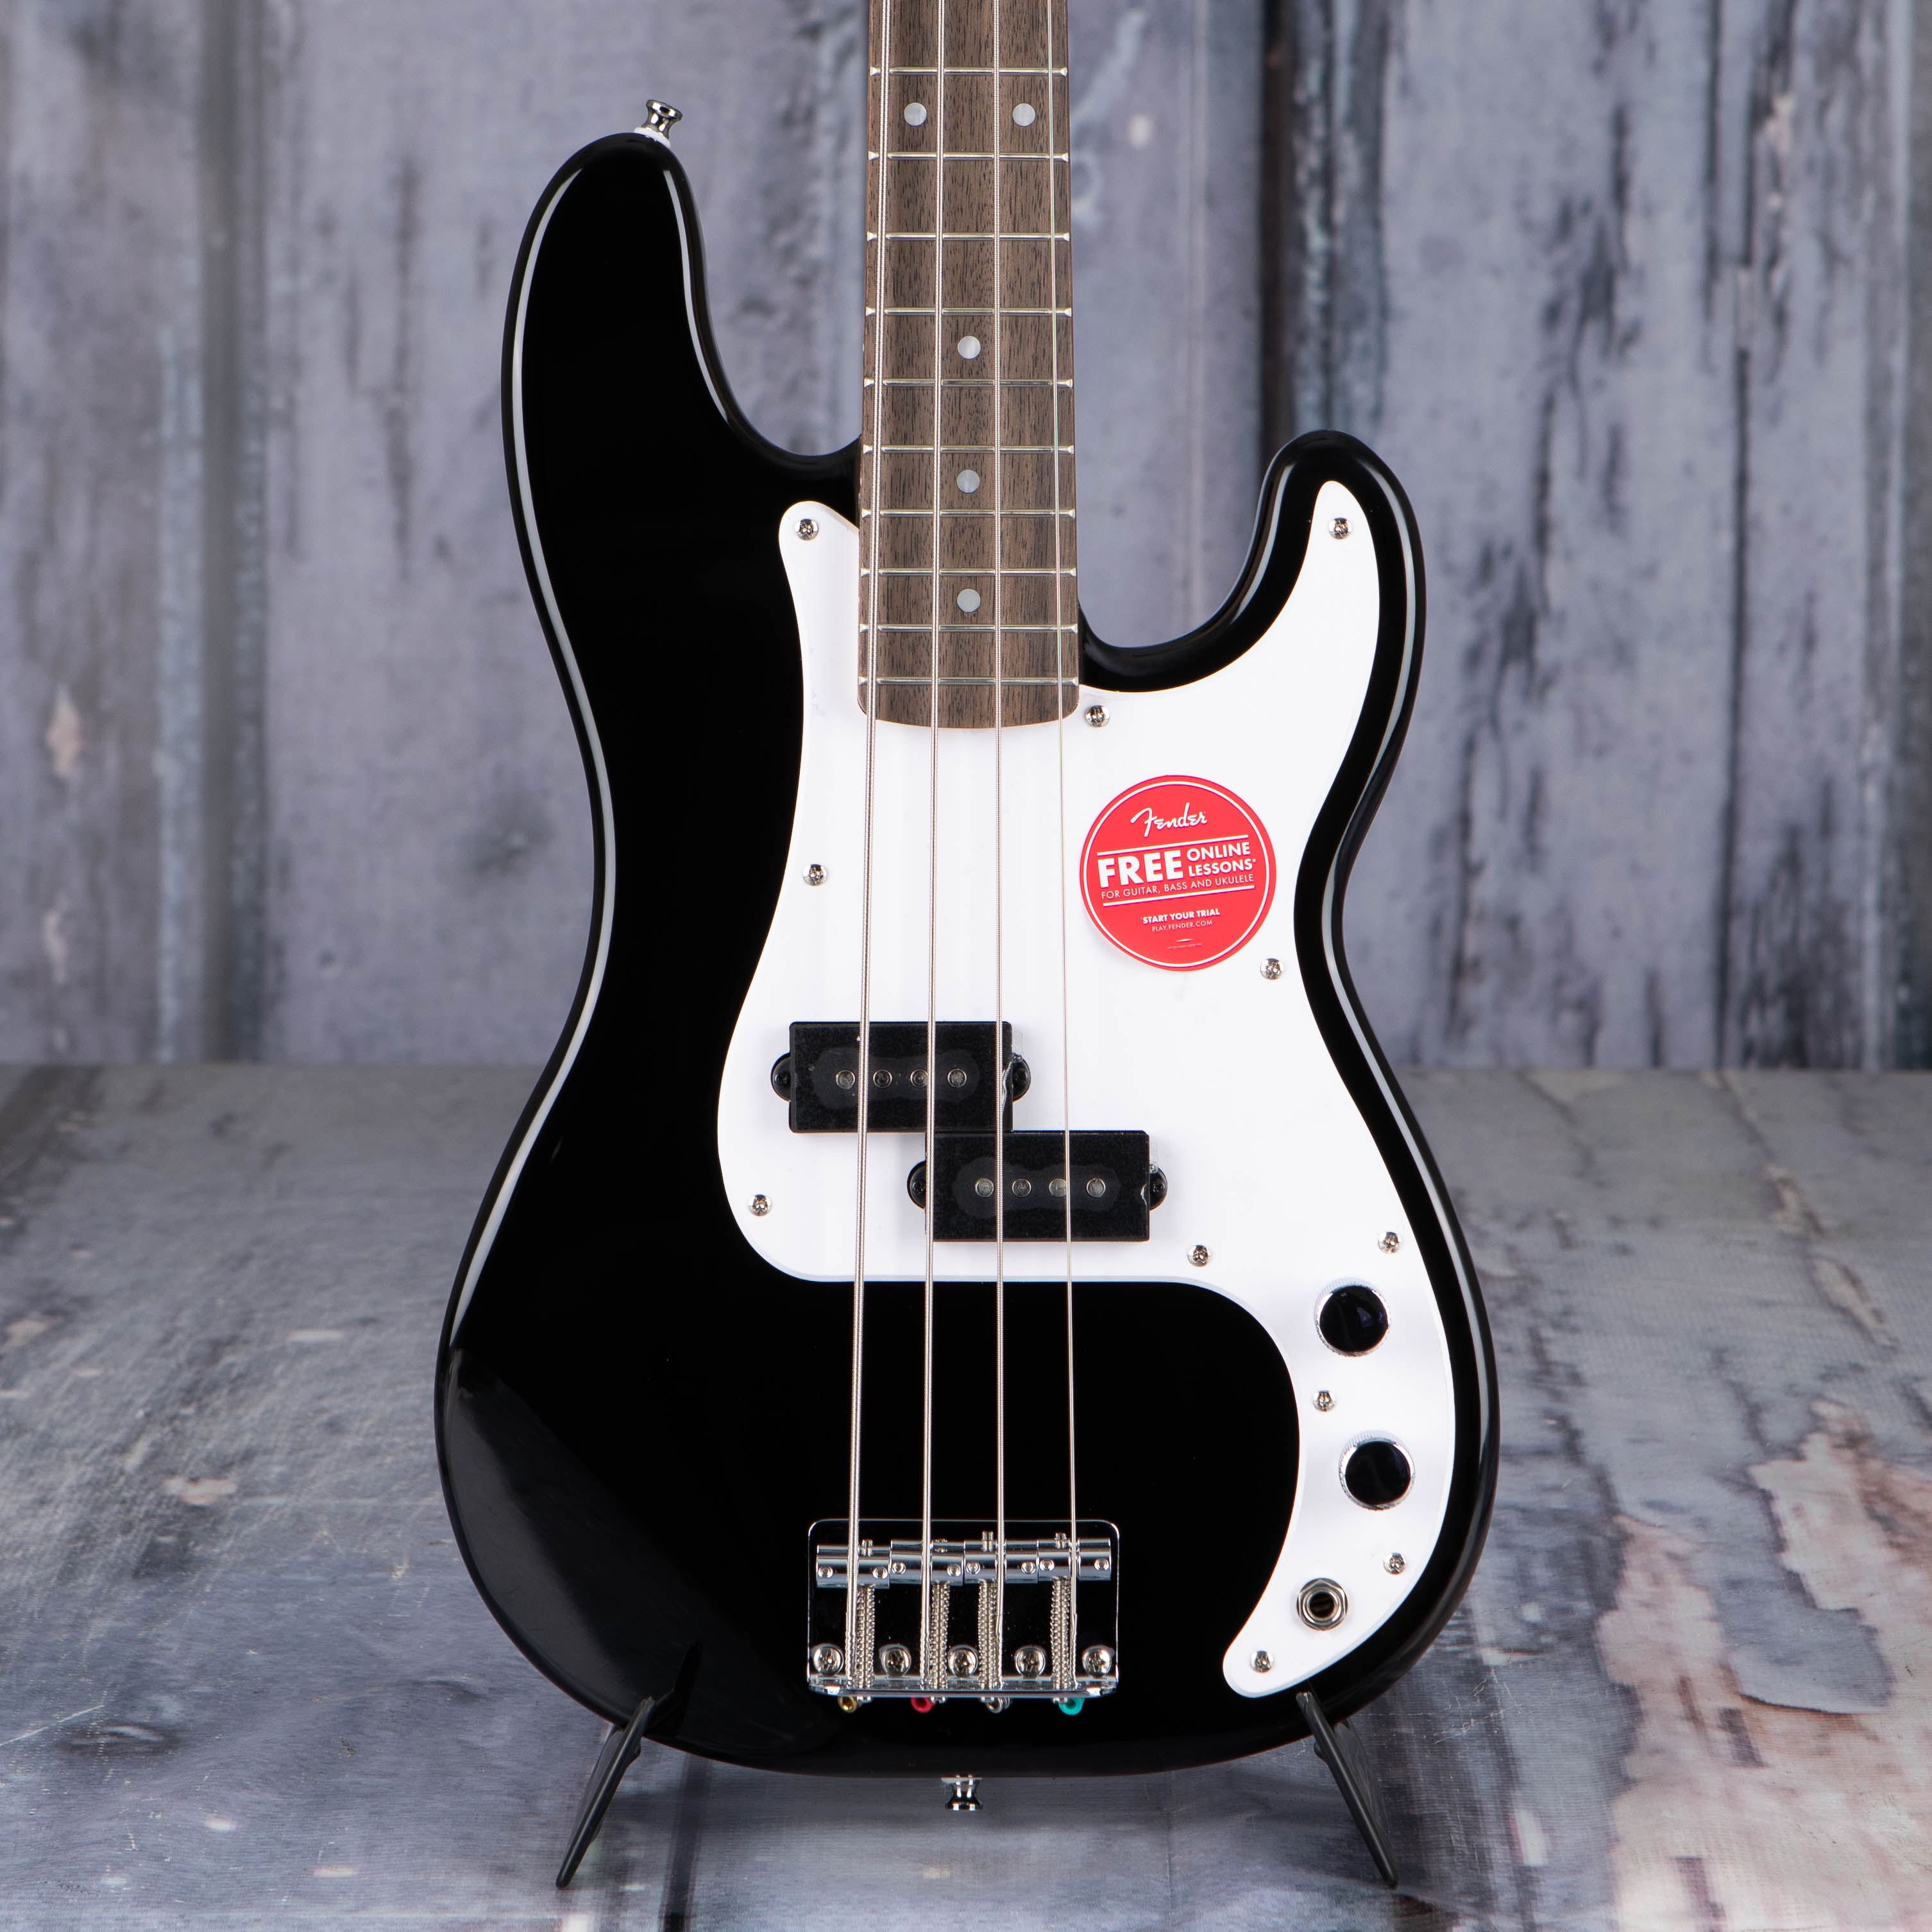 Squier Mini Precision Bass, Black | For Sale | Replay Guitar Exchange